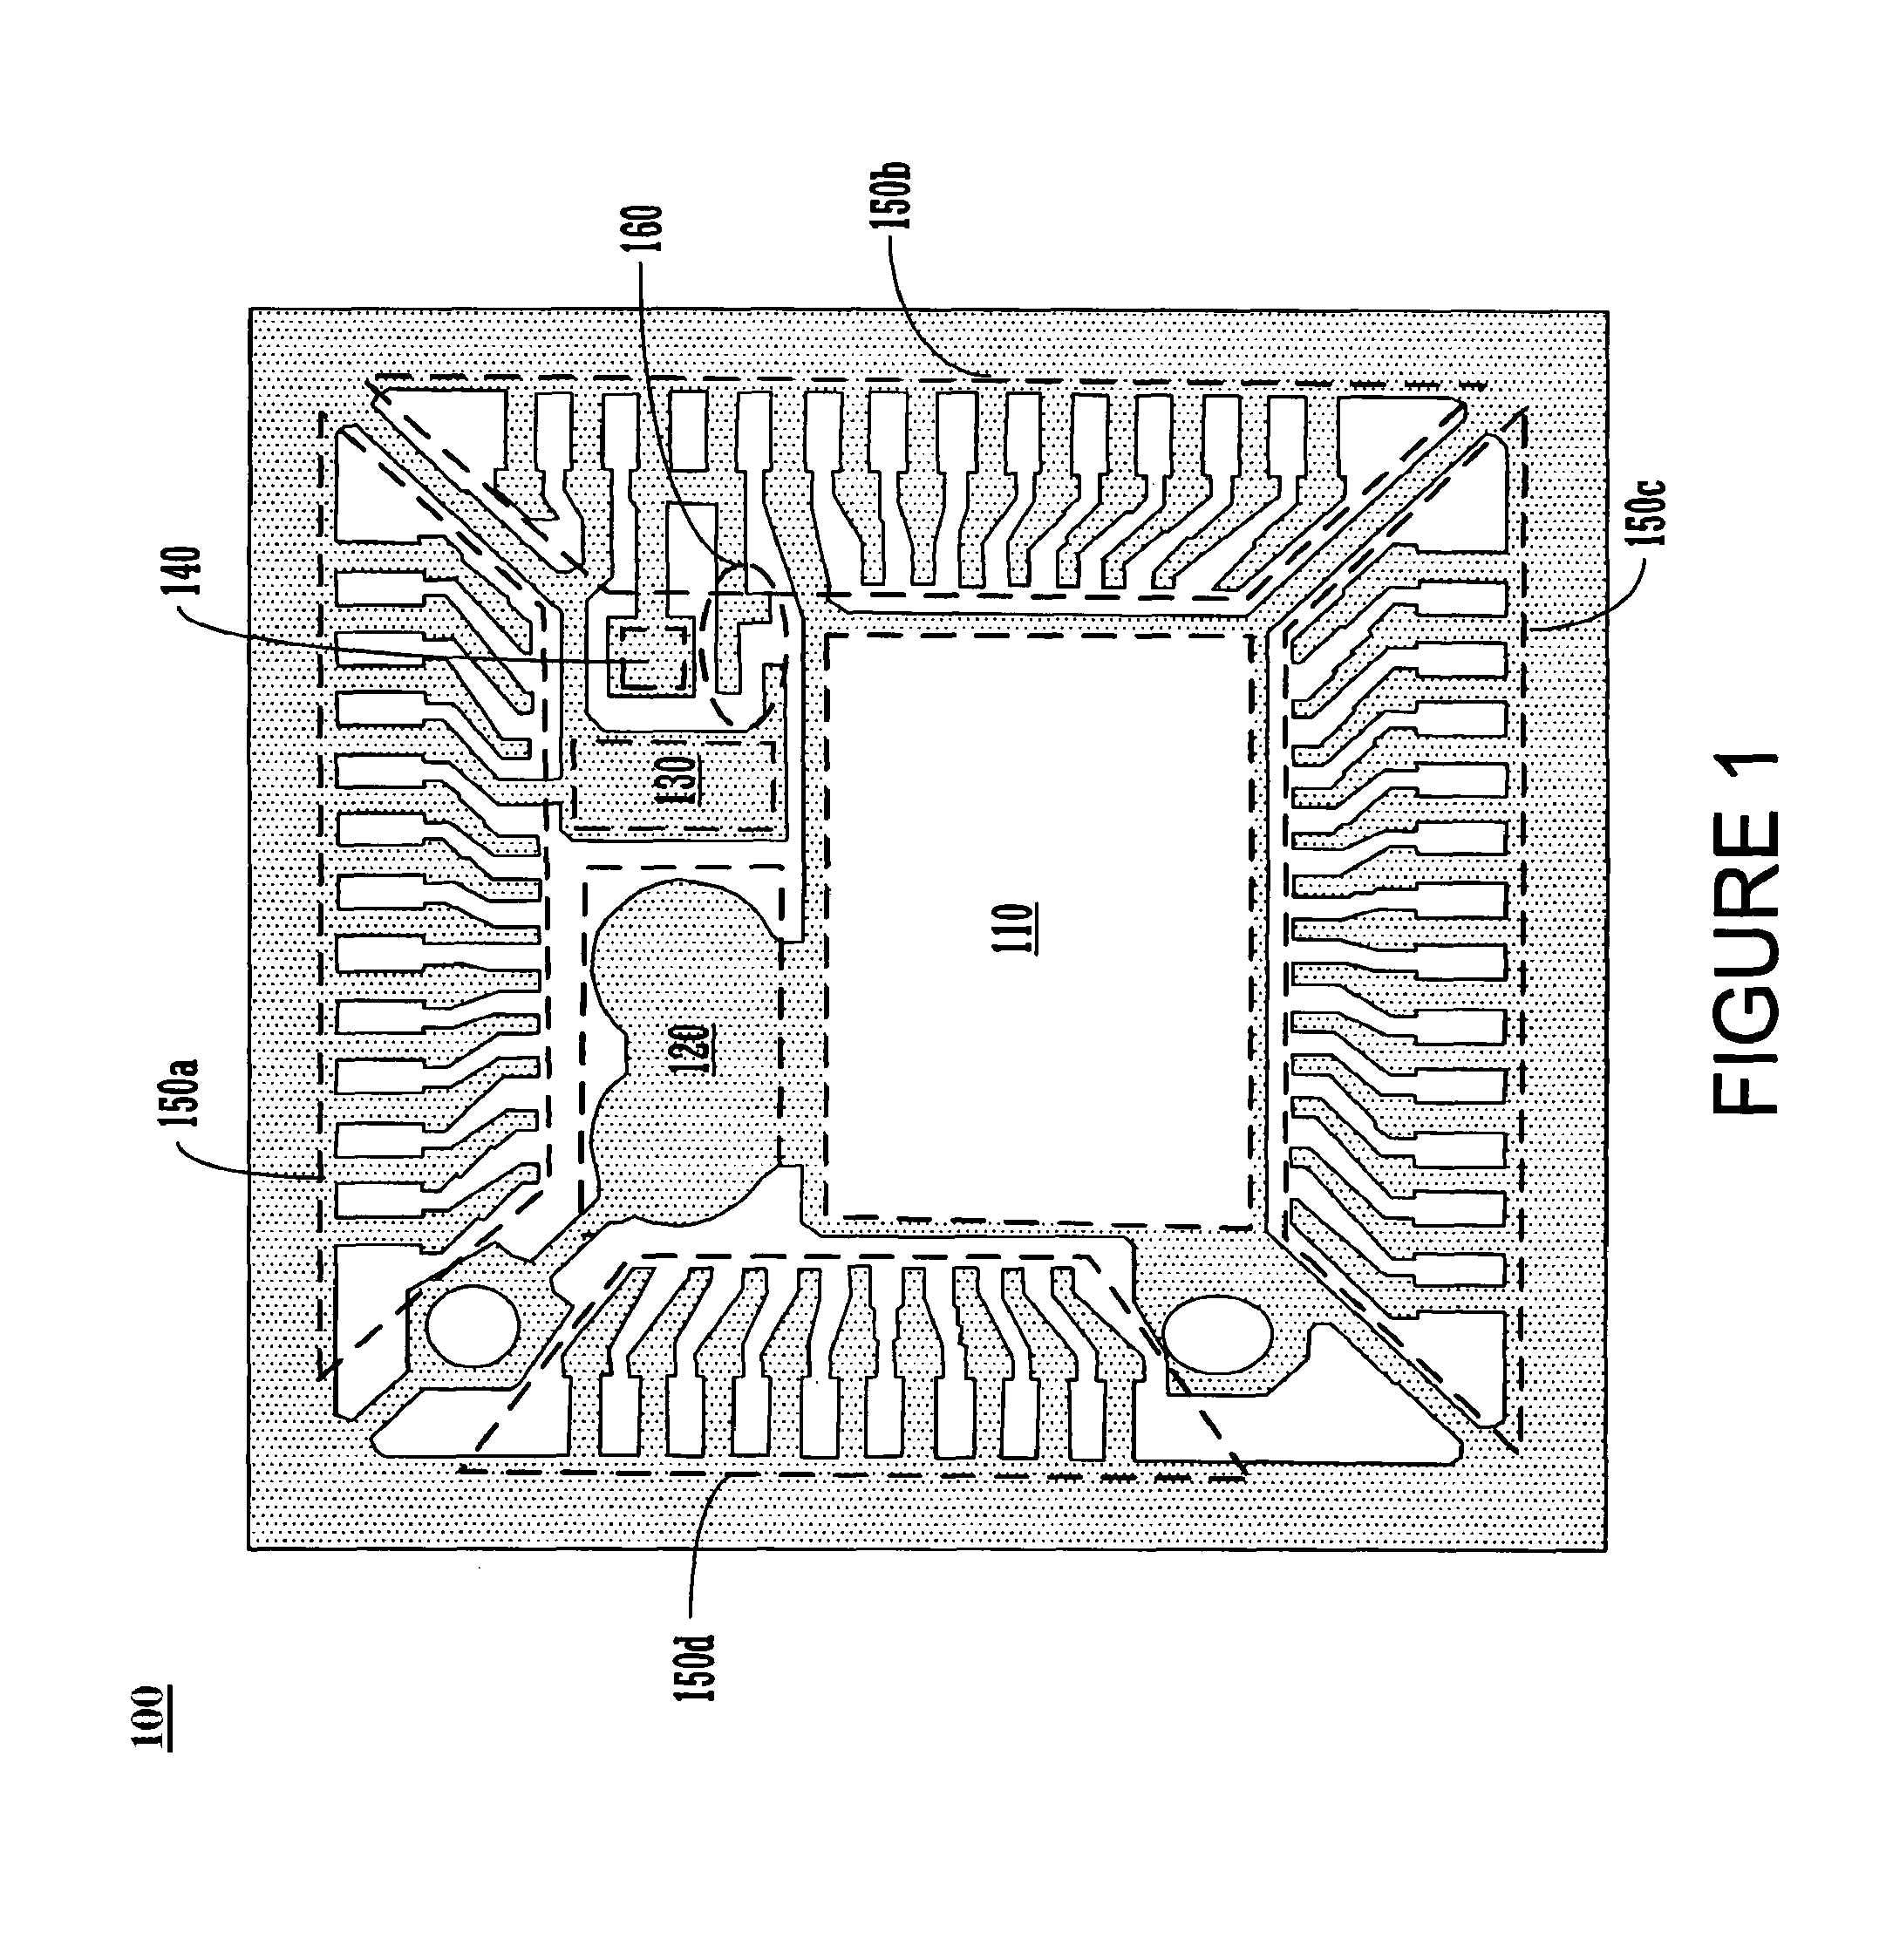 Multiple die paddle leadframe and semiconductor device package